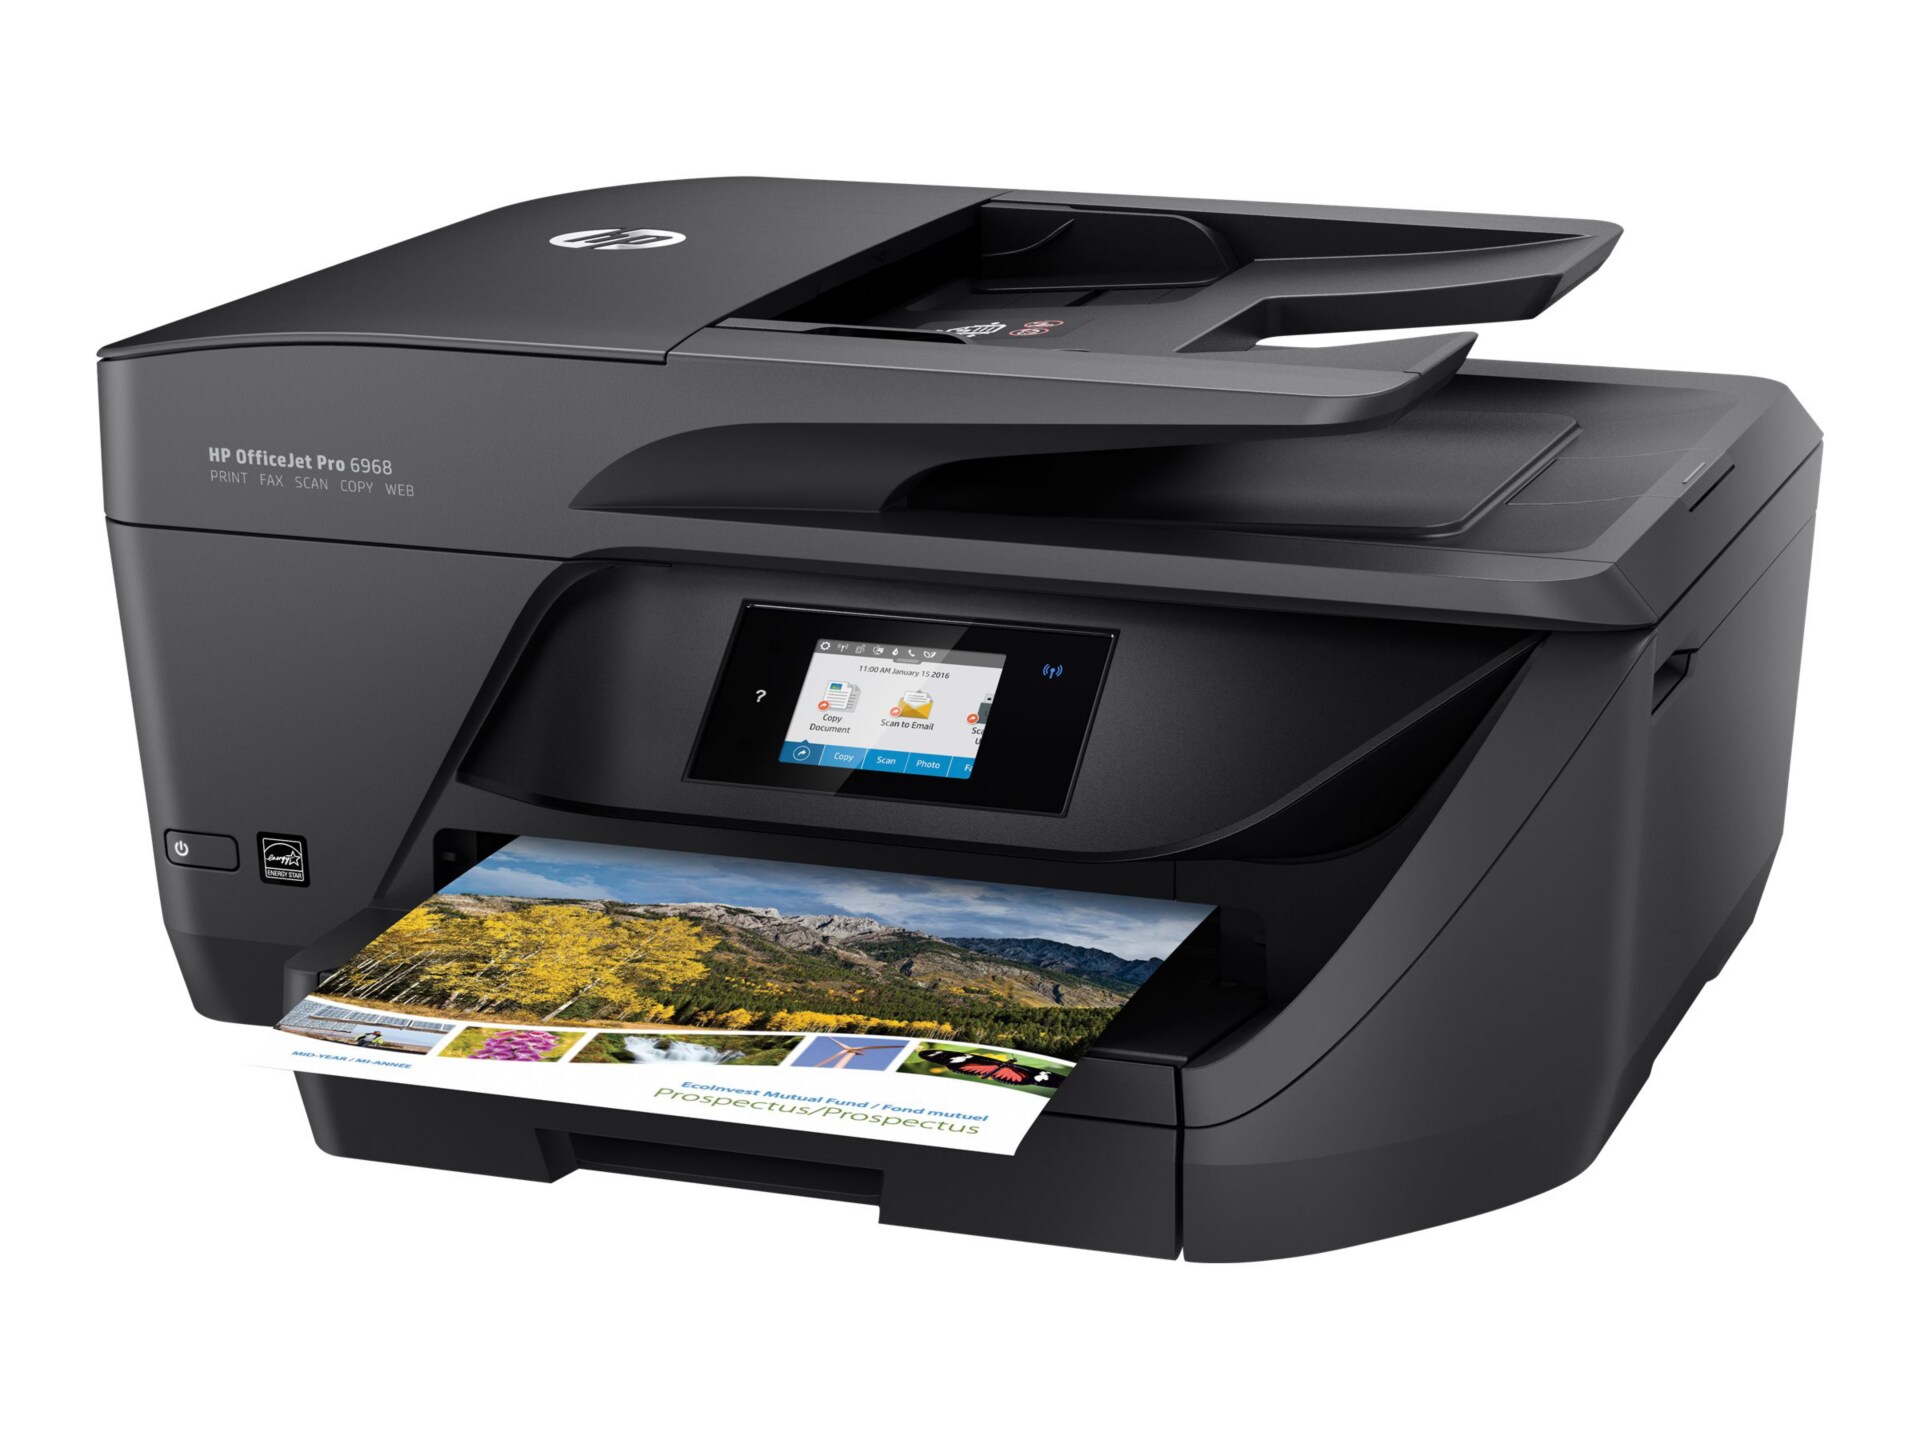 HP Officejet Pro 6968 All-in-One - multifunction printer - color